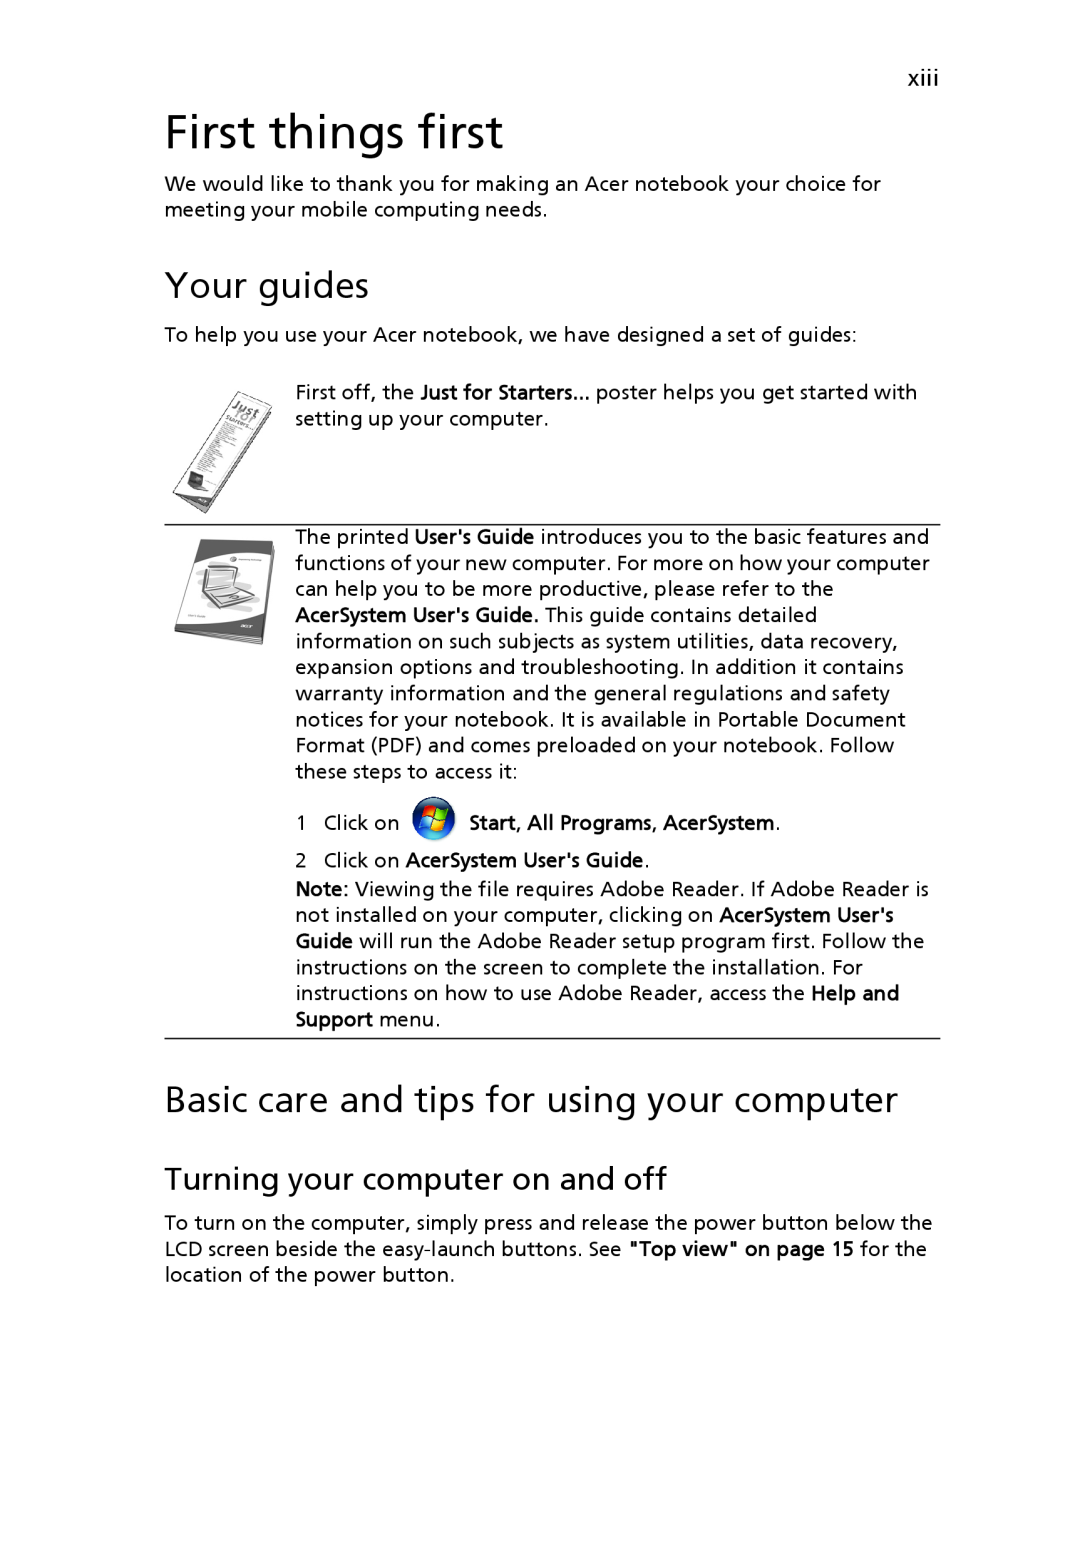 Acer MS2219 First things first, Your guides, Basic care and tips for using your computer, Turning your computer on and off 